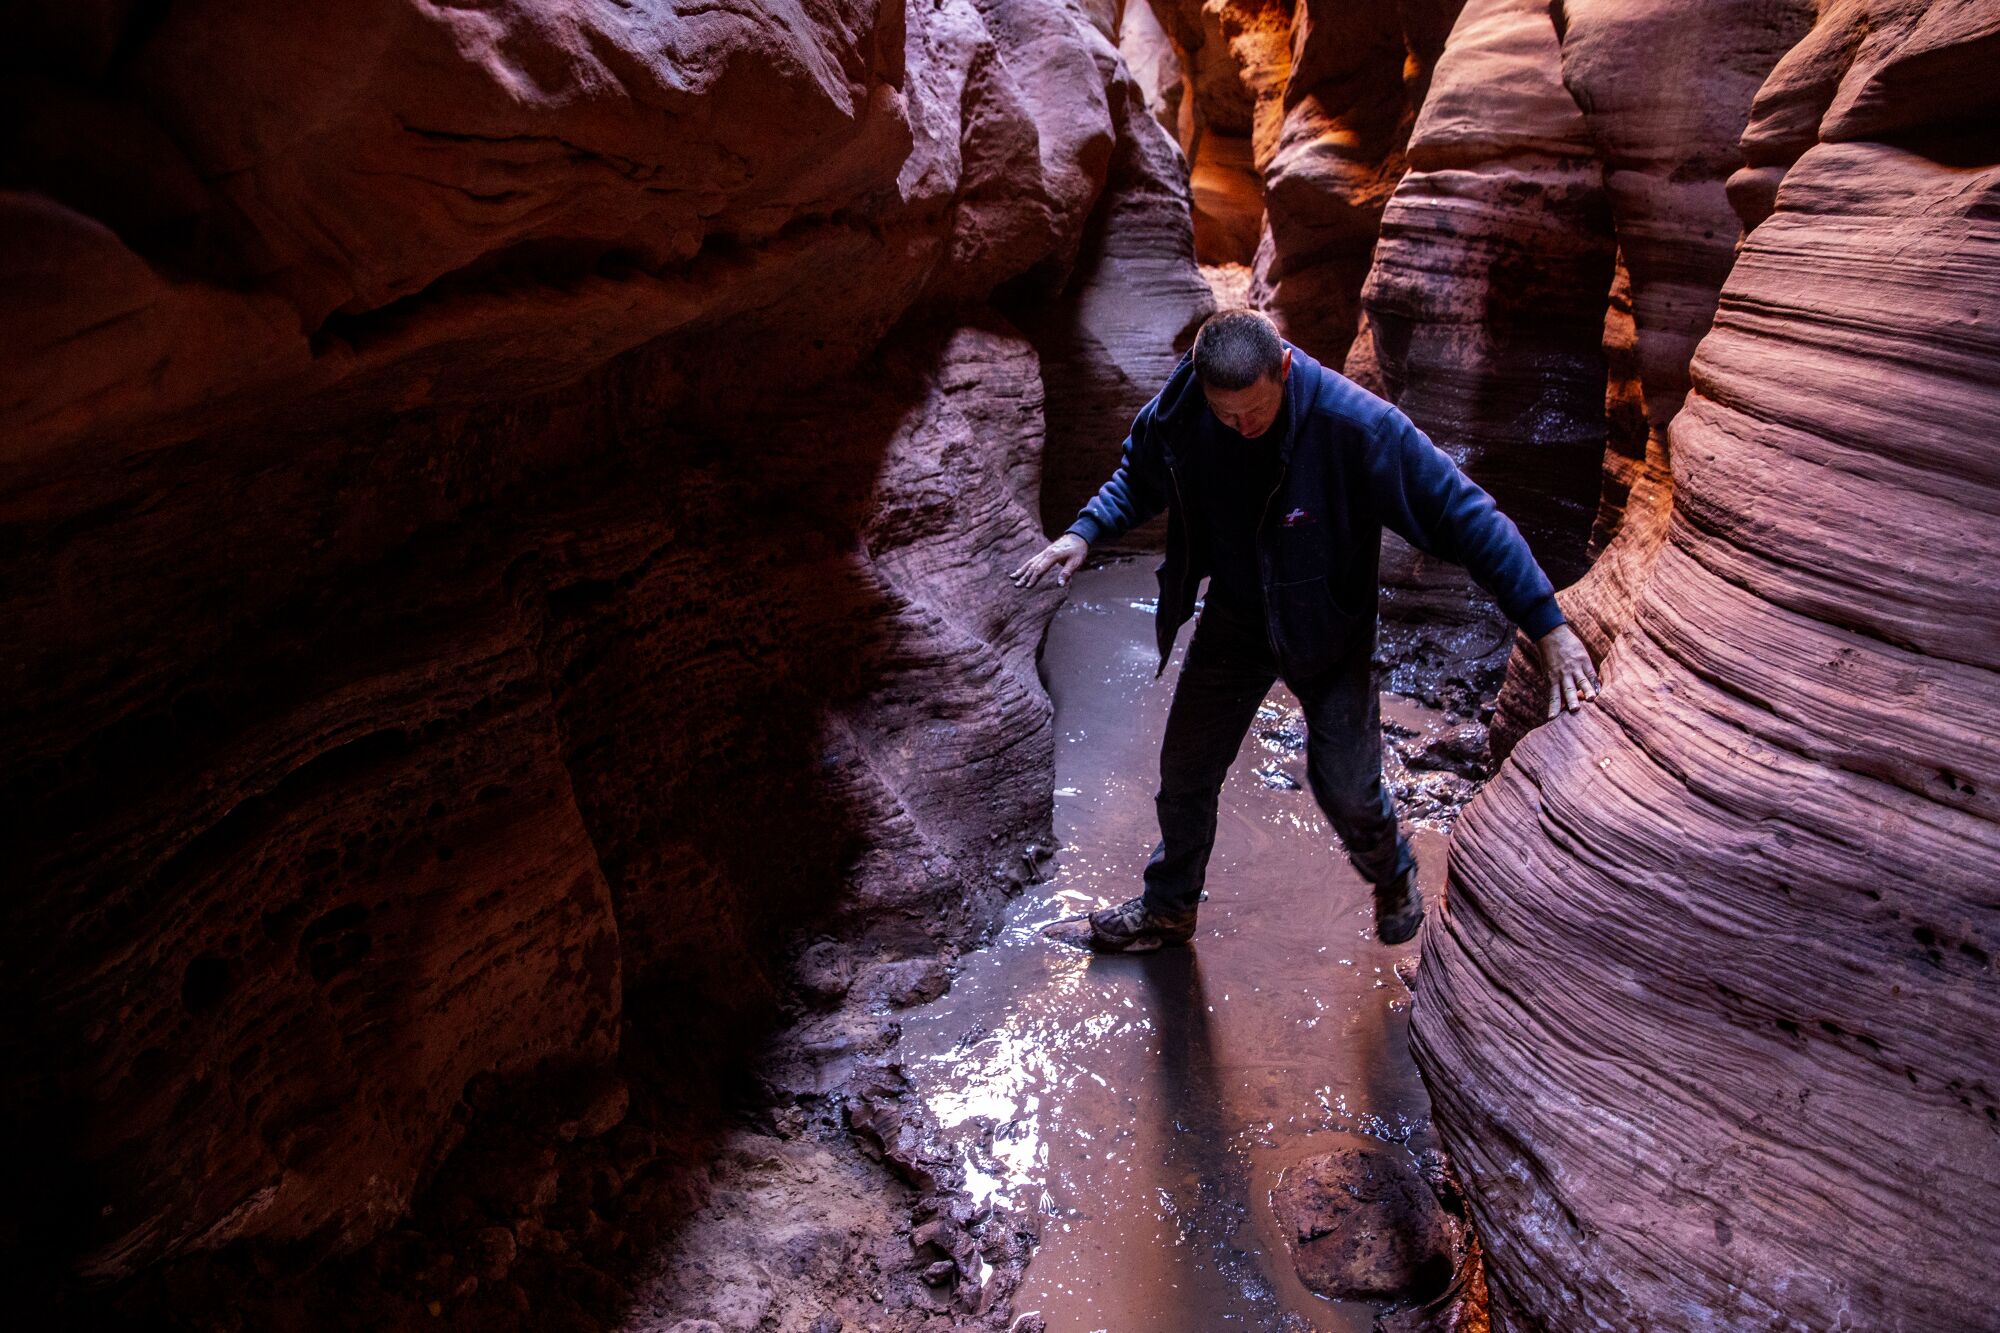 The "cesspool," an obstacle filled with standing, putrid water inside Buckskin Gulch.